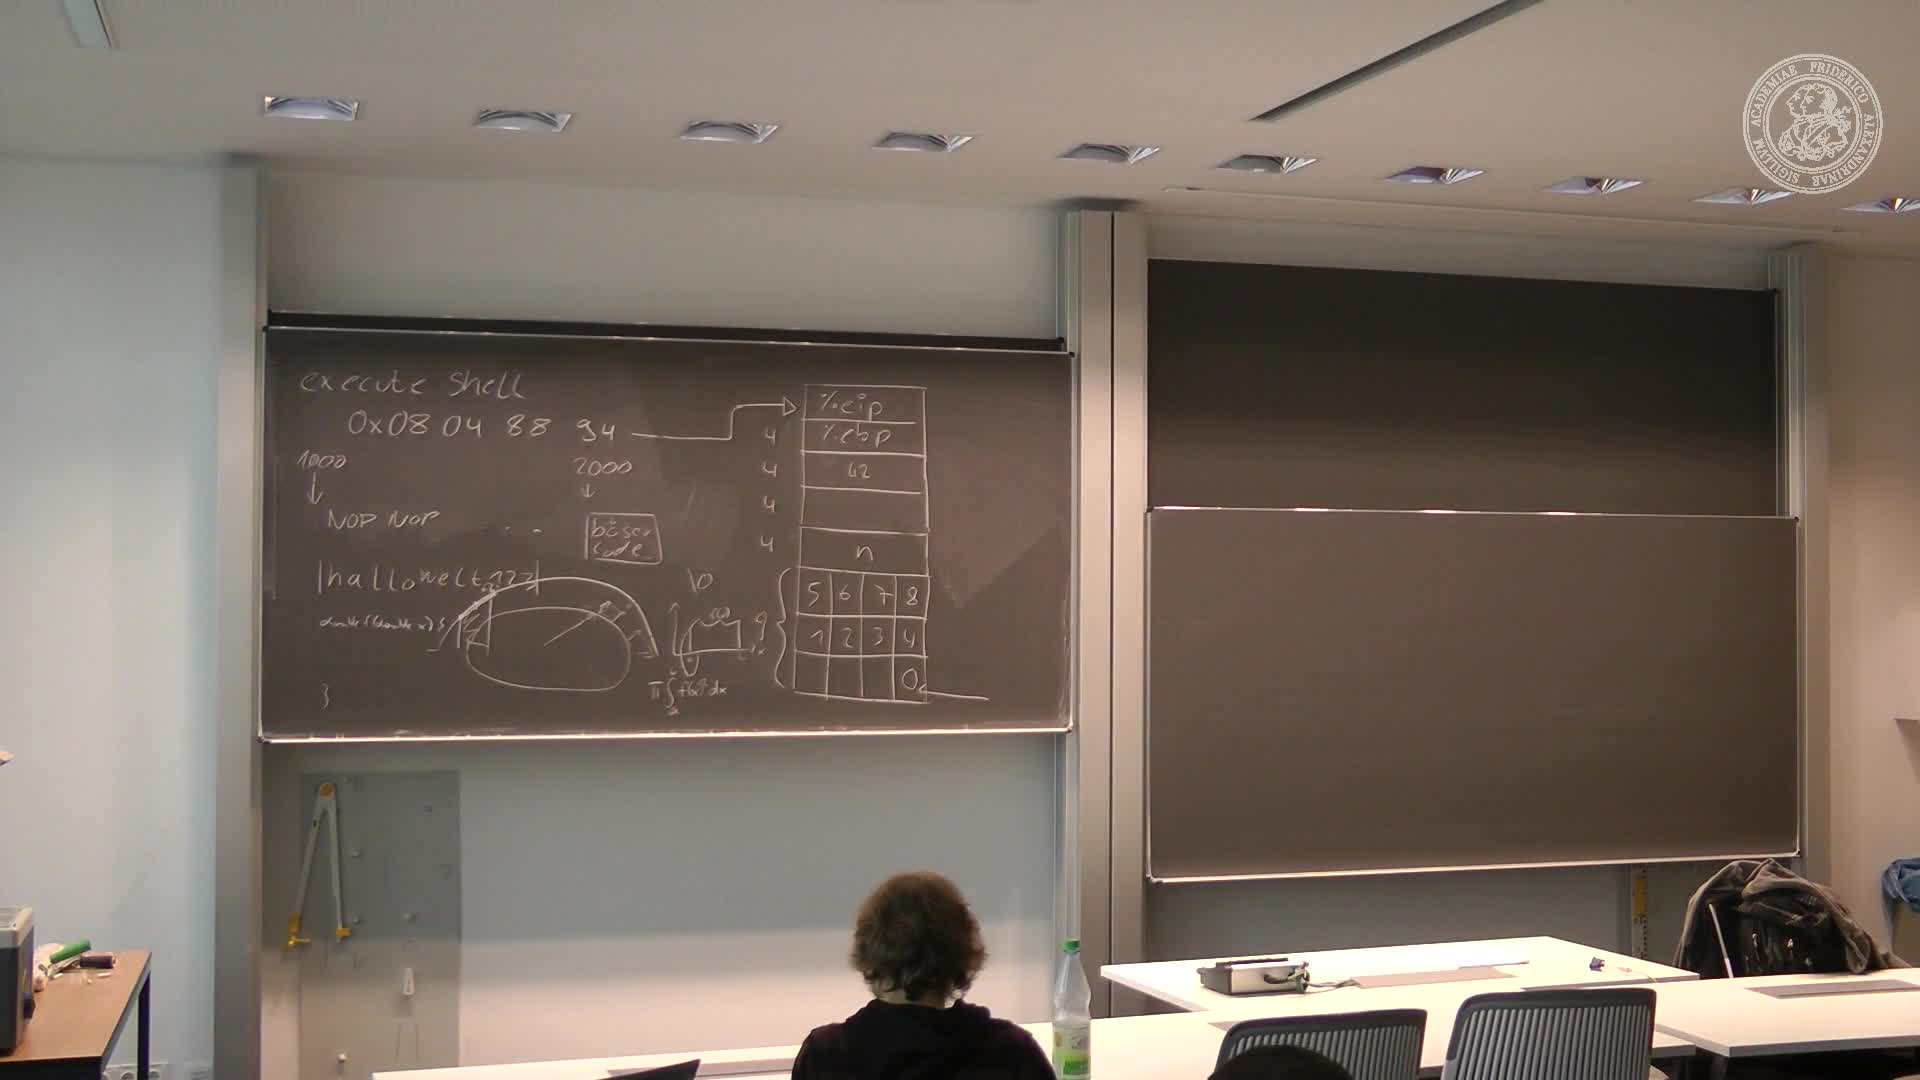 Nonclassical Logics in Computer Science preview image